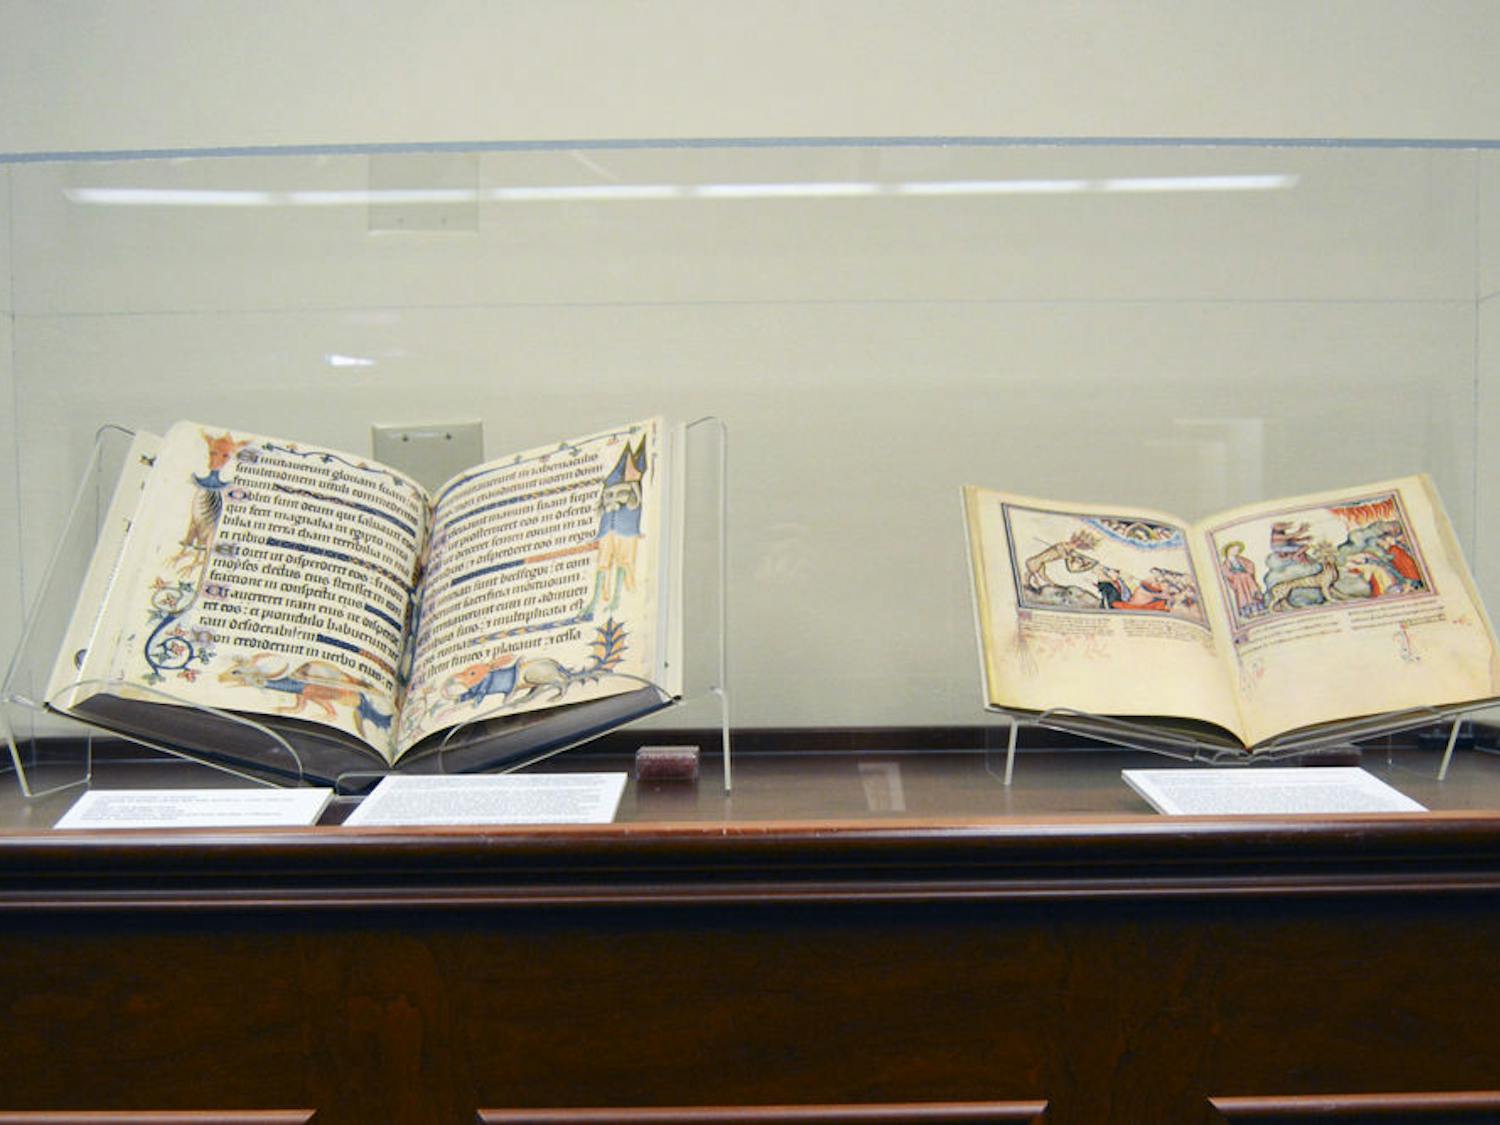 Two examples of the books on display. Left is “The Luttrell Psalter: a facsimile,” a 14th-century illuminated collection of Psalms and other devotional materials; right is “The Cloisters Apocalypse,” an illustrated 14th-century version of the Revelation of St. John.